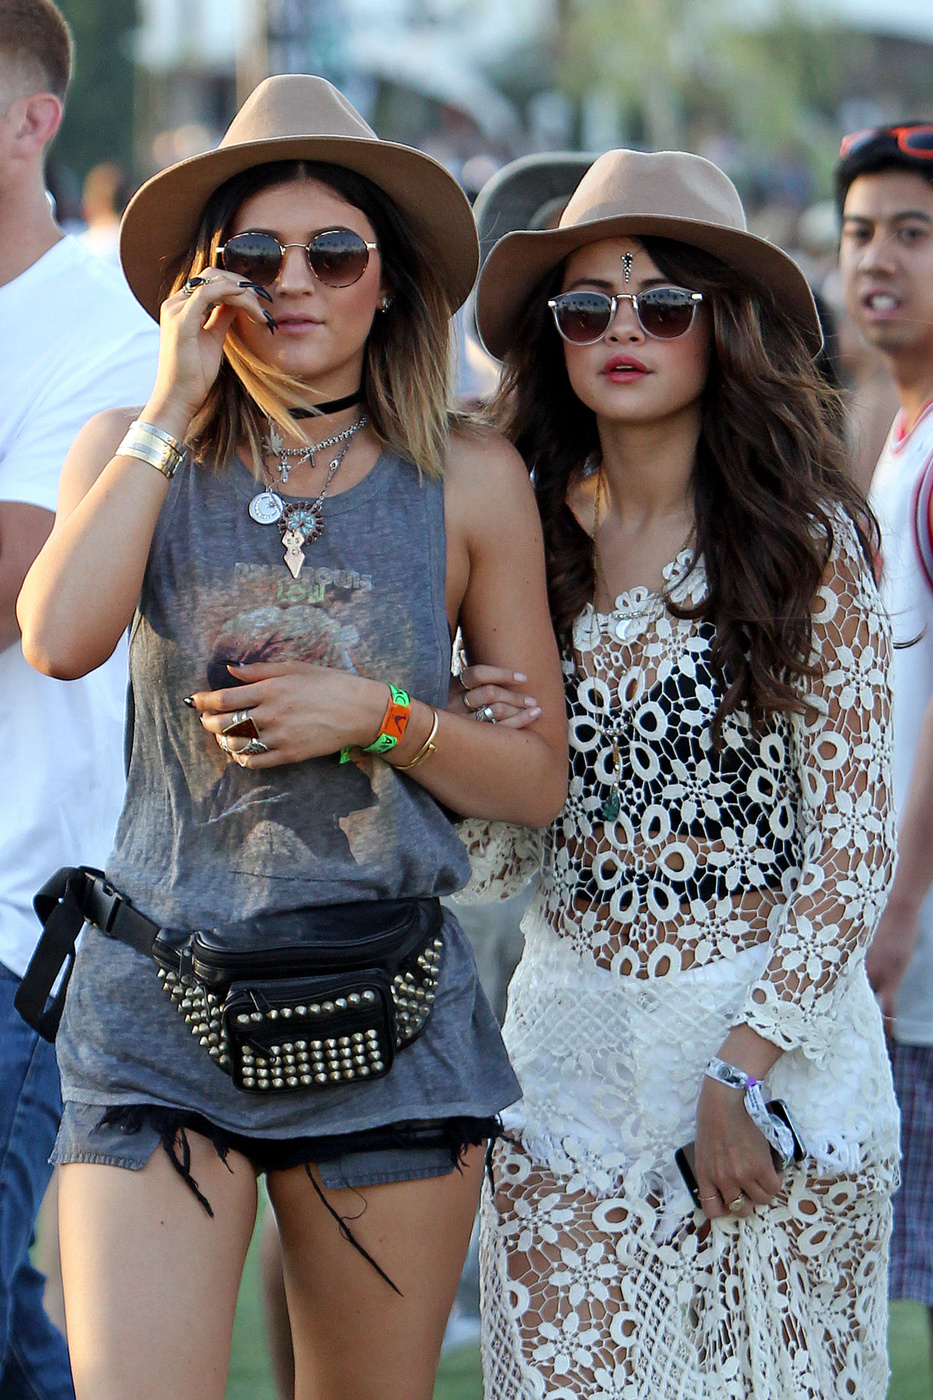 Selena Gomez is joined by Kendall and Kylie Jenner on day one of week one at The Coachella Music Festival in Indio